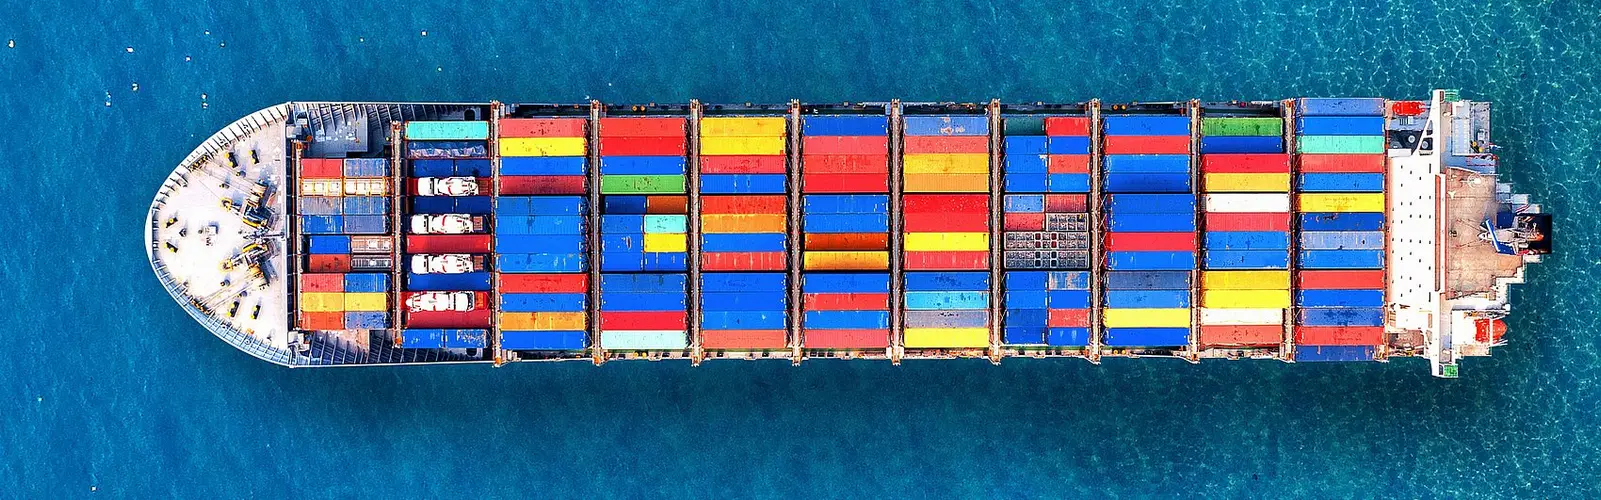 csm_aerial-view-of-container-cargo-ship-in-sea_63763328f4.jpg